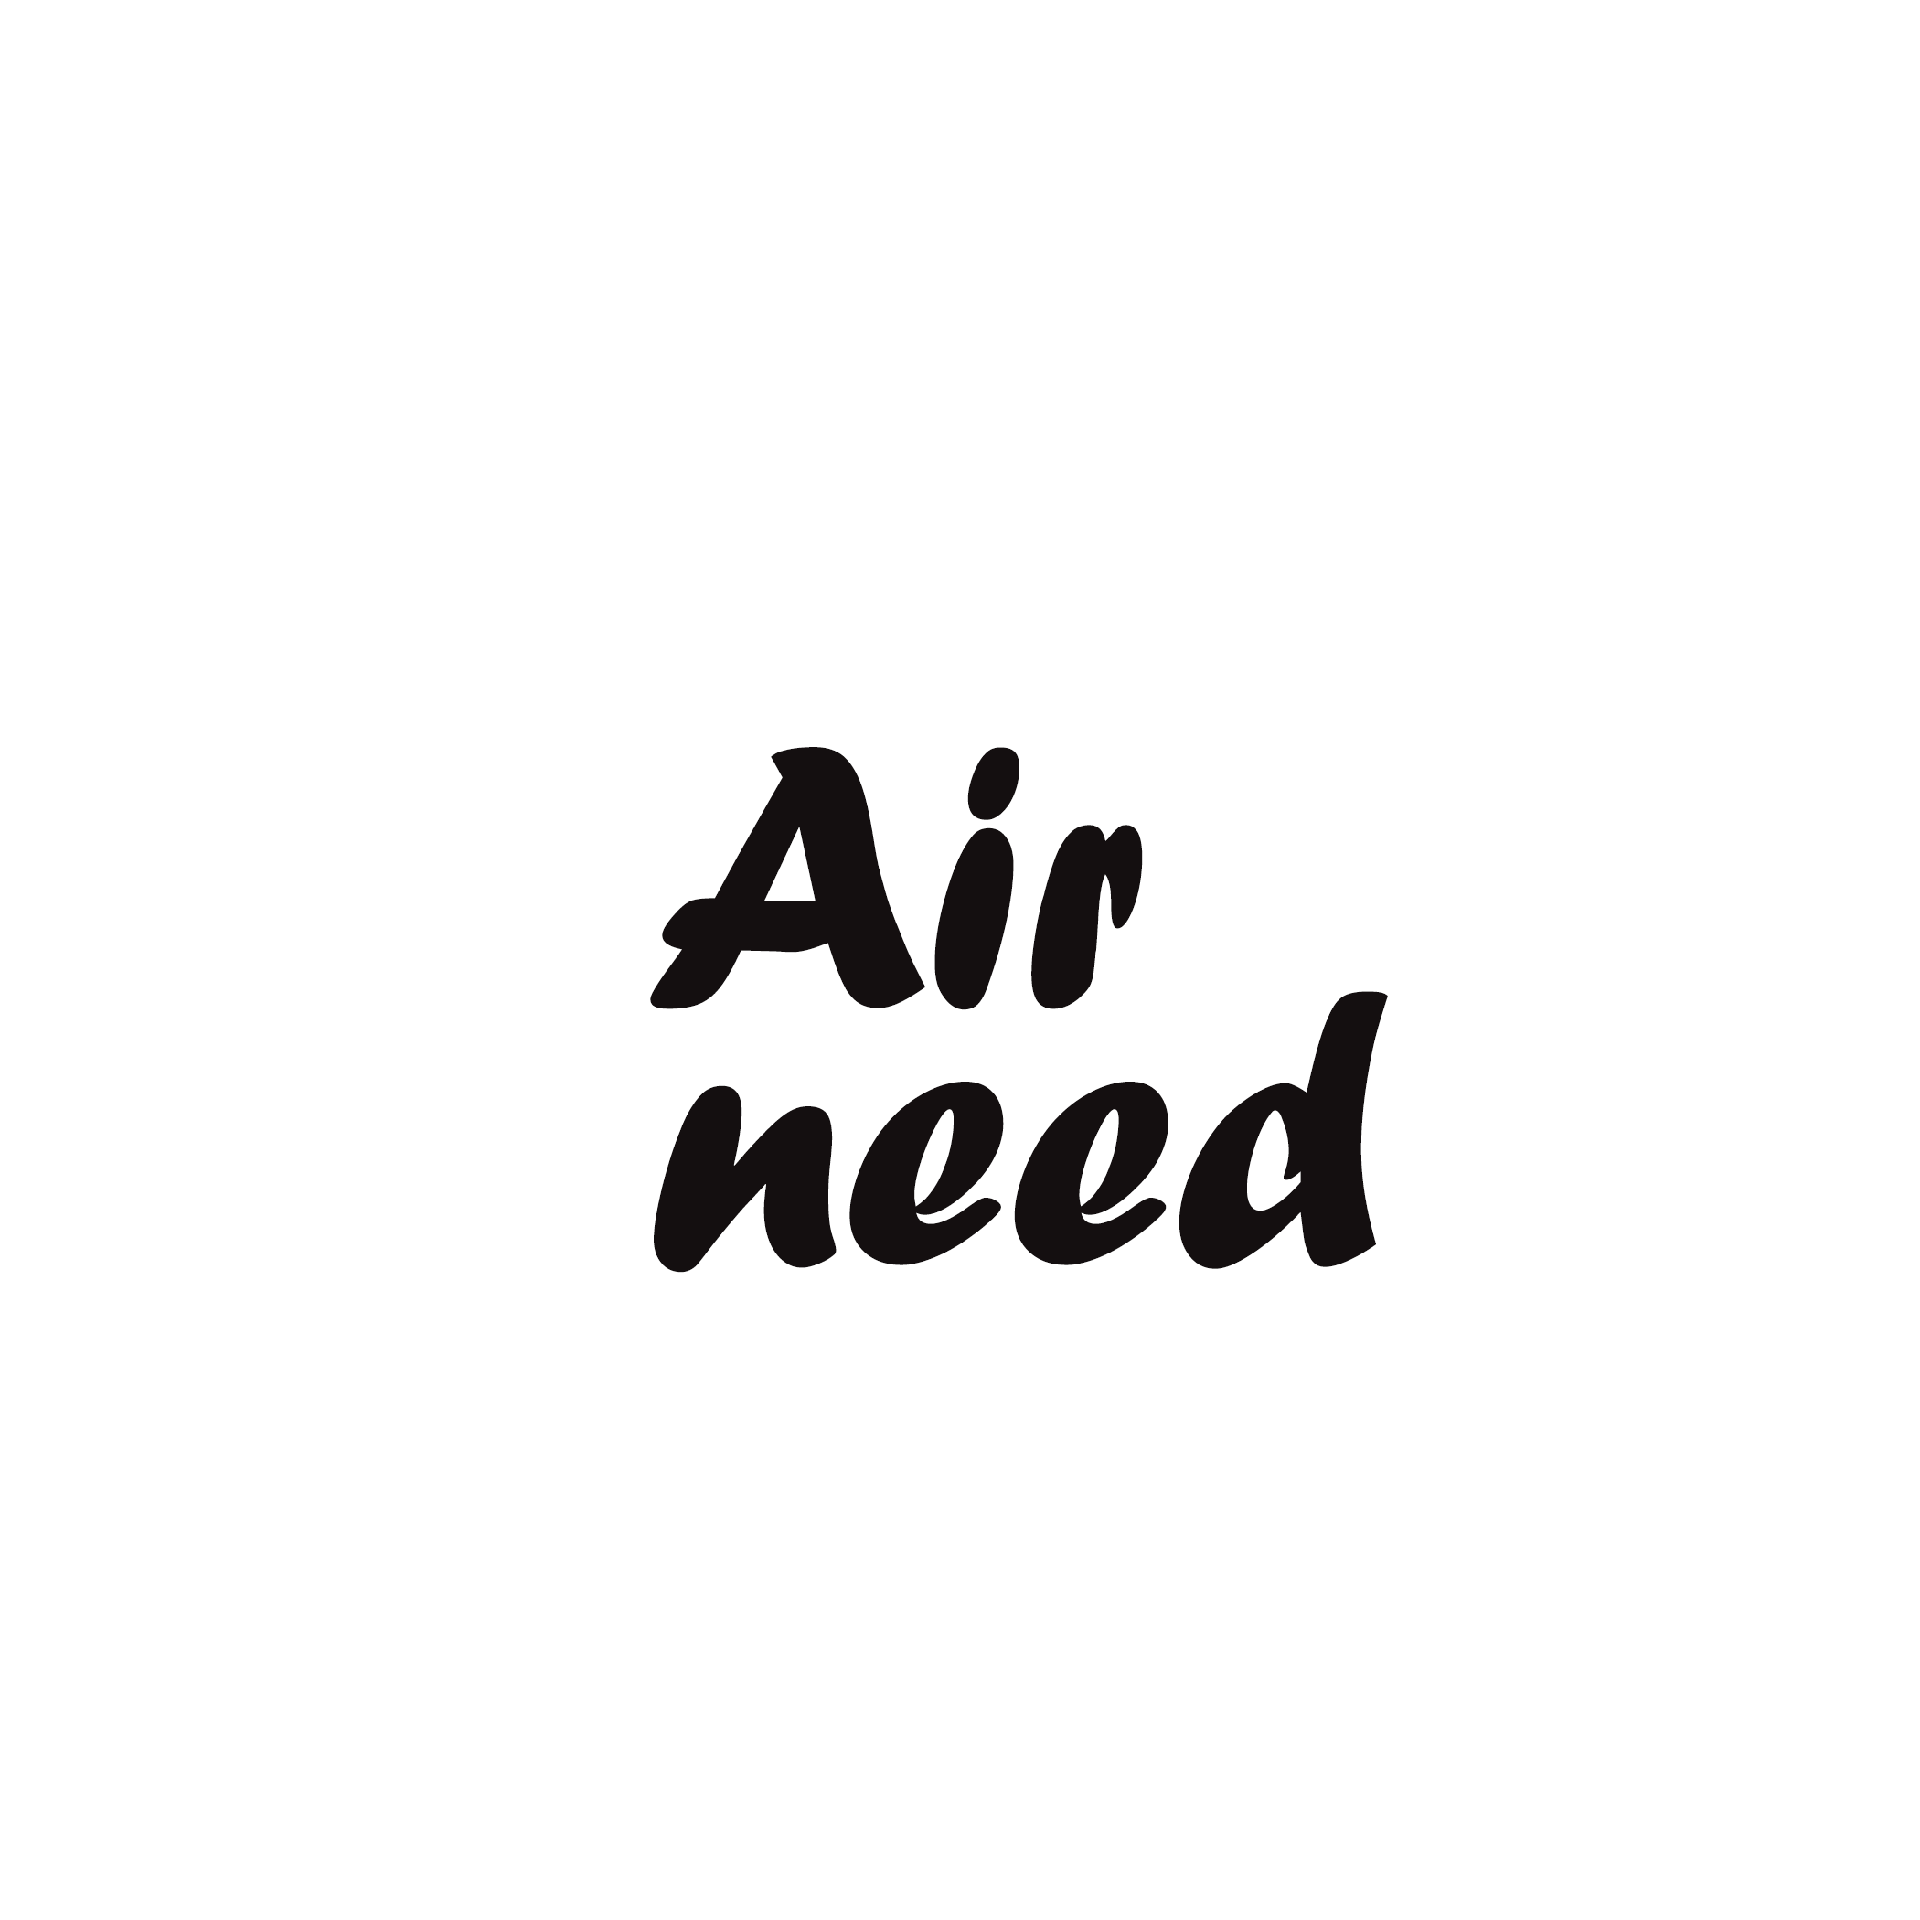 Product Brand: Air Need